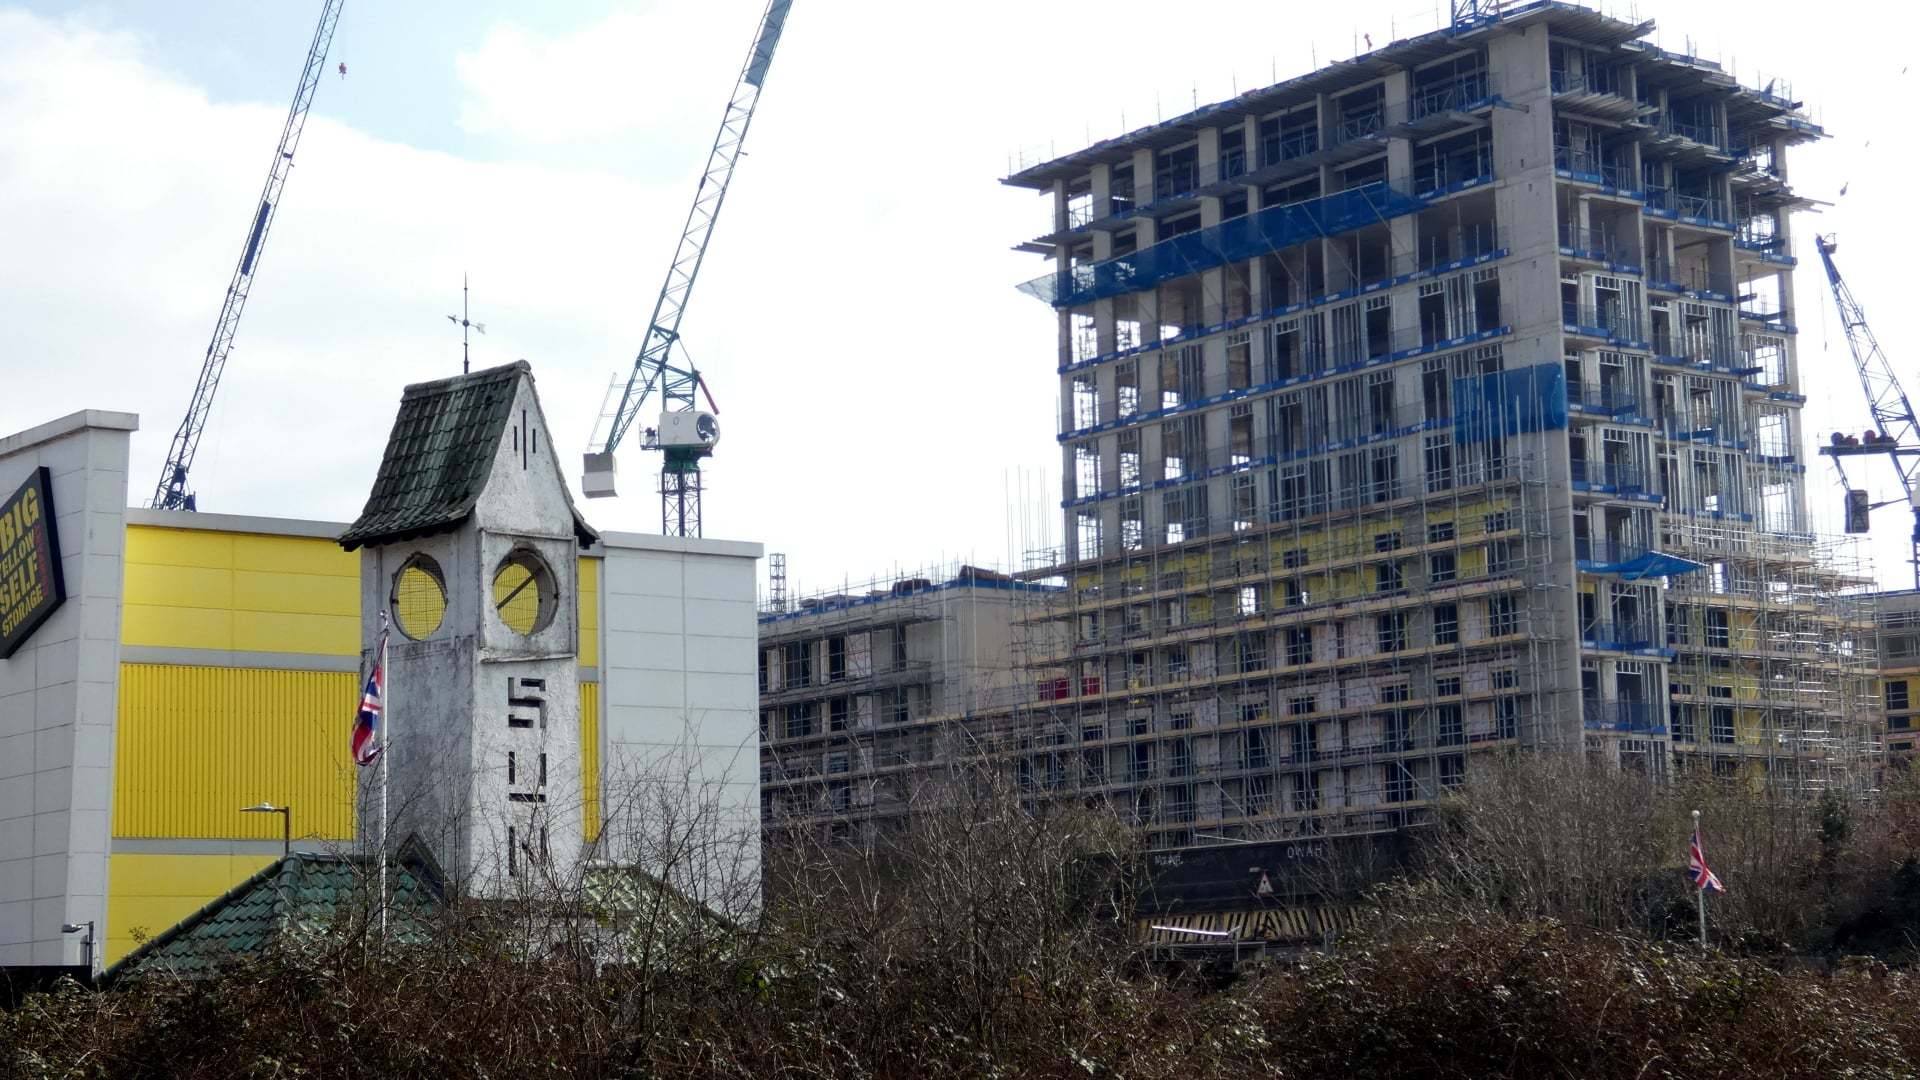 Sun Clock Tower with the construction of a 24 storey tower in the background. Credit: Lynda Bullock/Watford Observer Camera Club